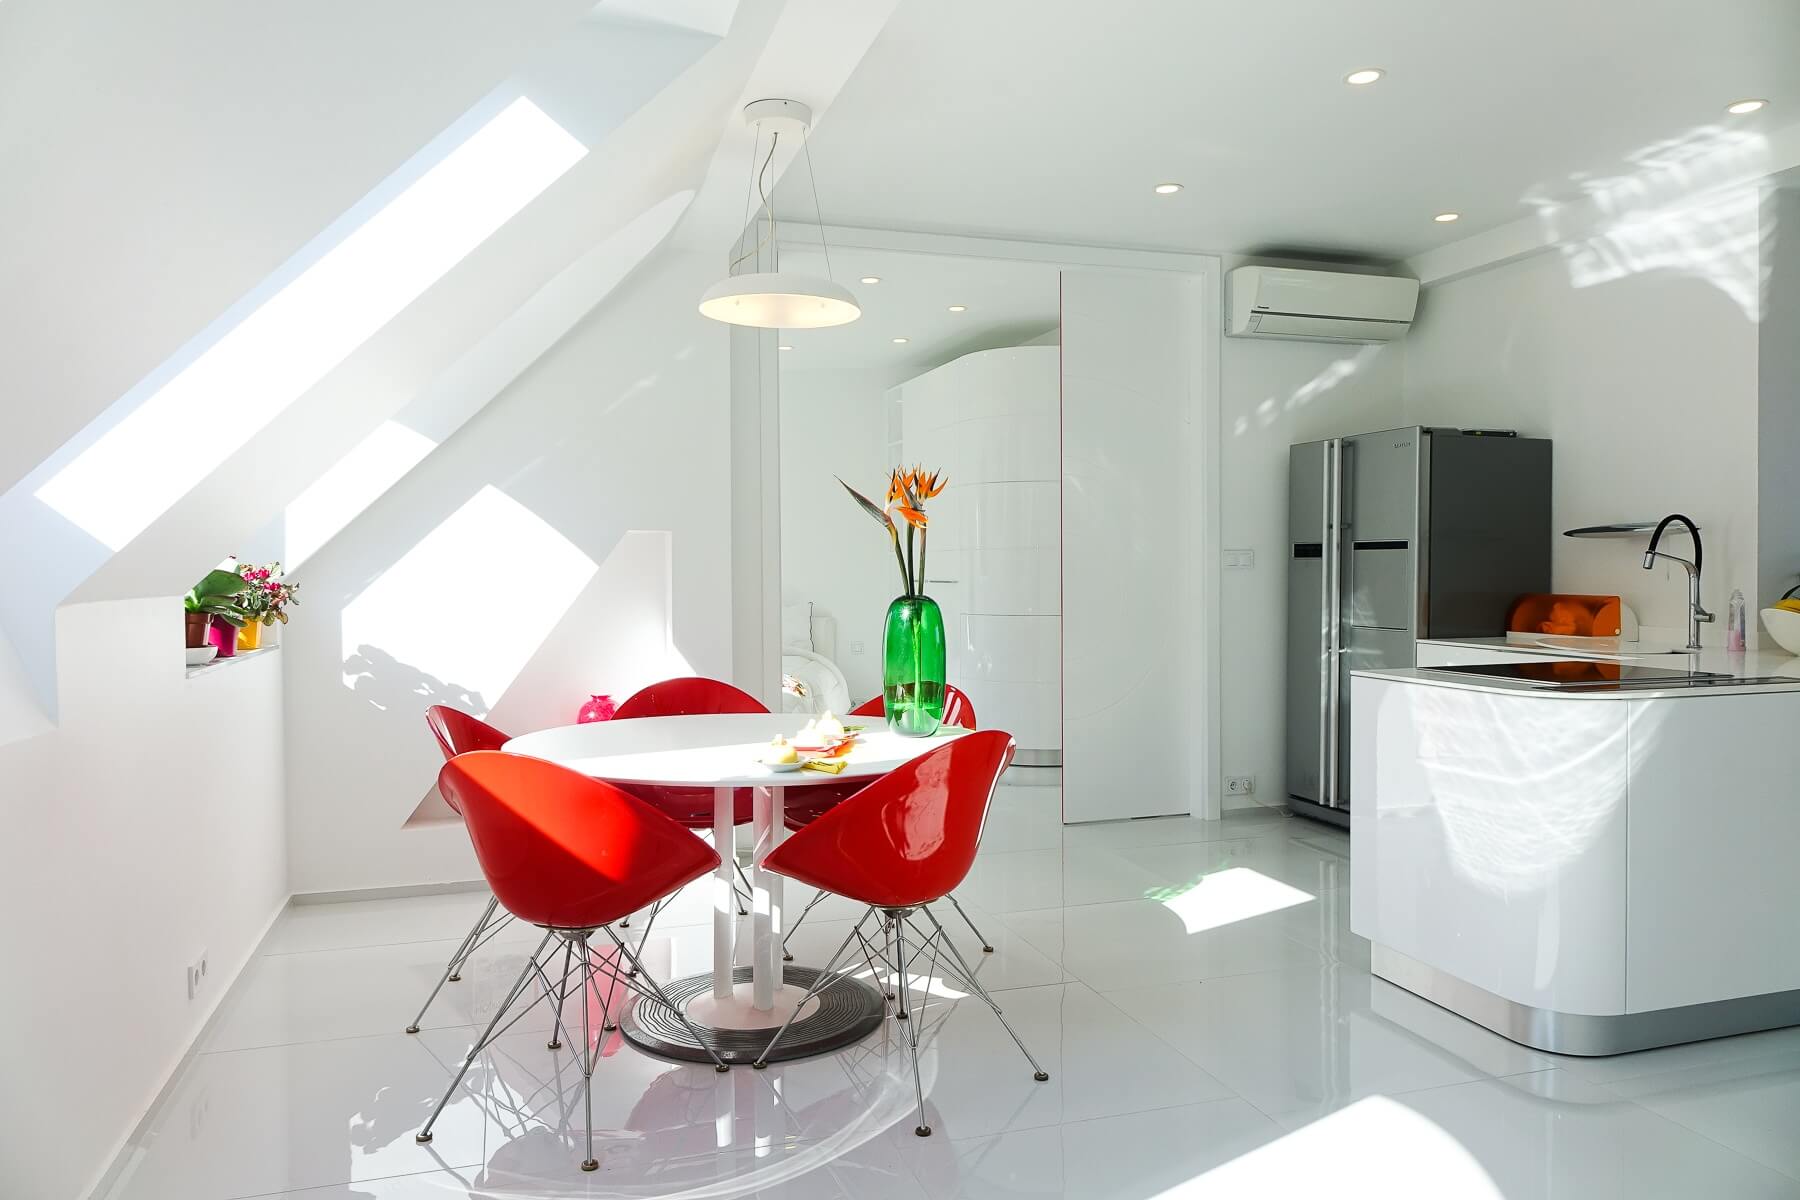 The attic kitchen is all white, with a corner cooking space and a small dining area by the window